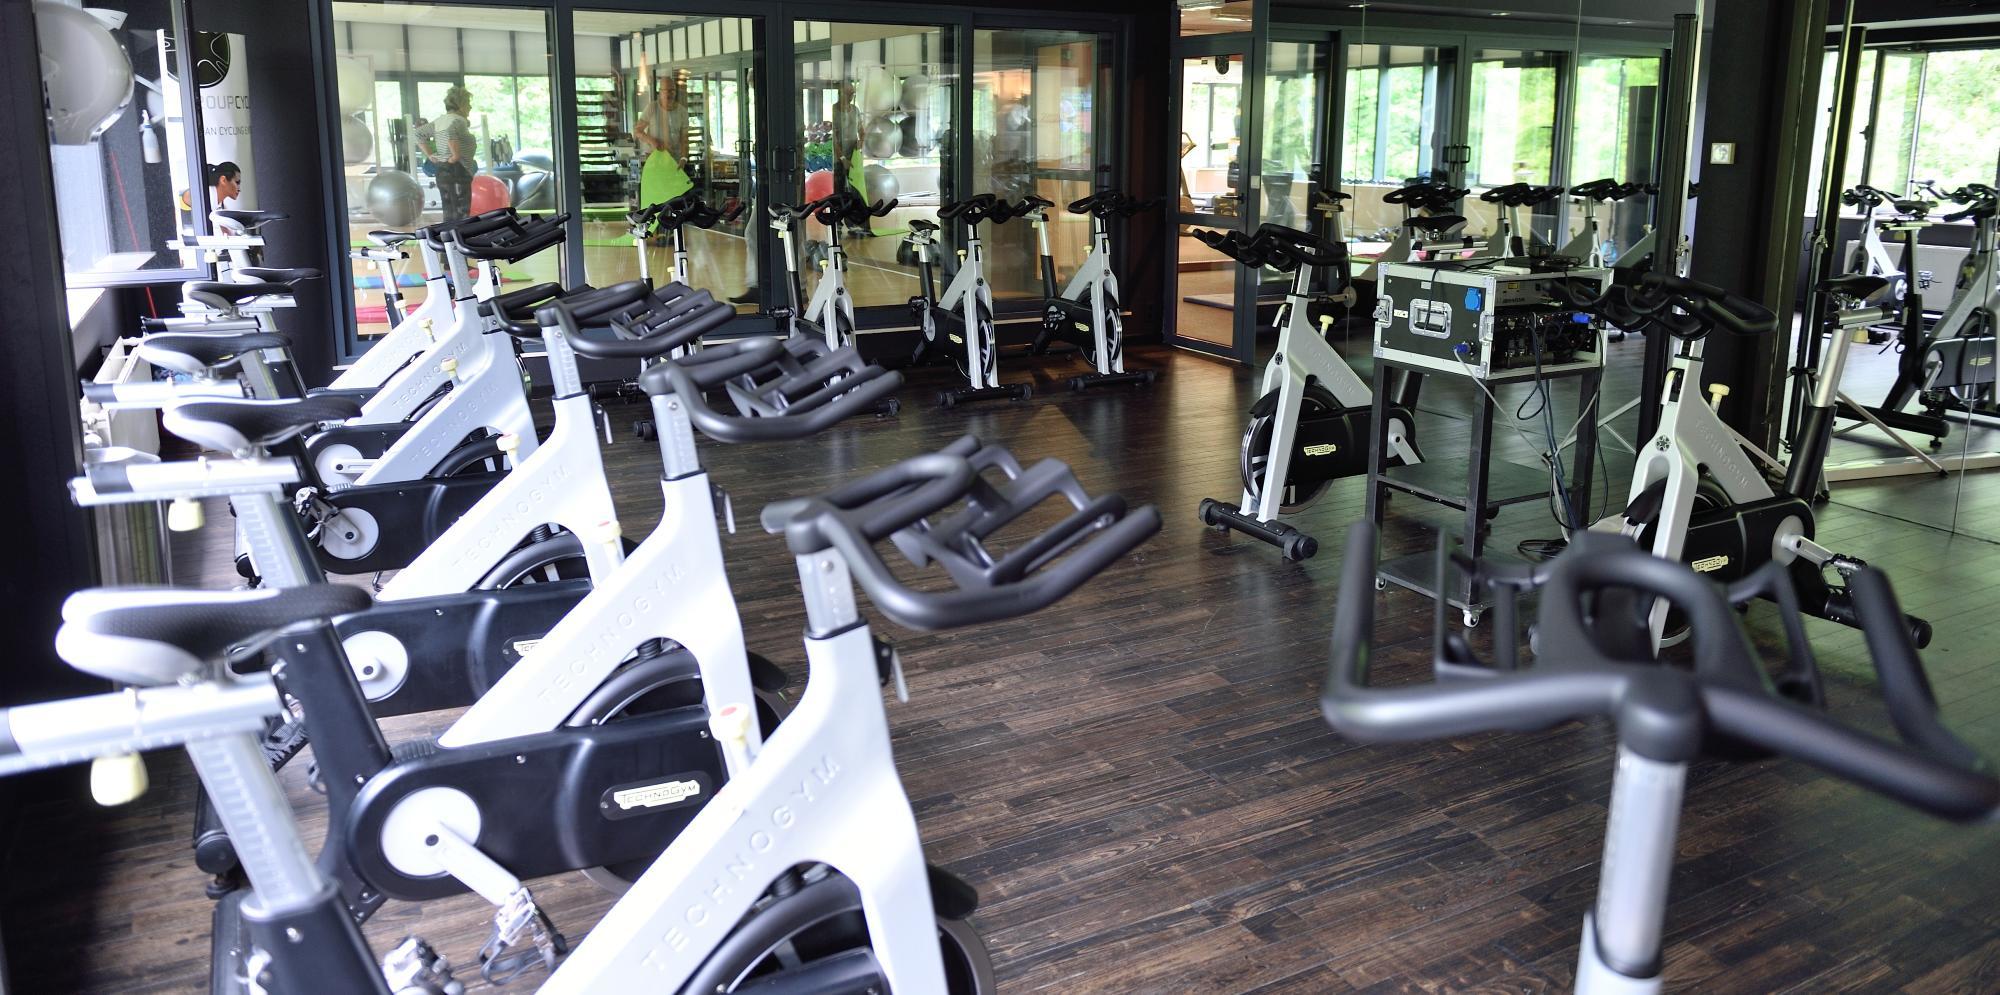 Martin'Spa Fitness and Wellness Club in Château du Lac